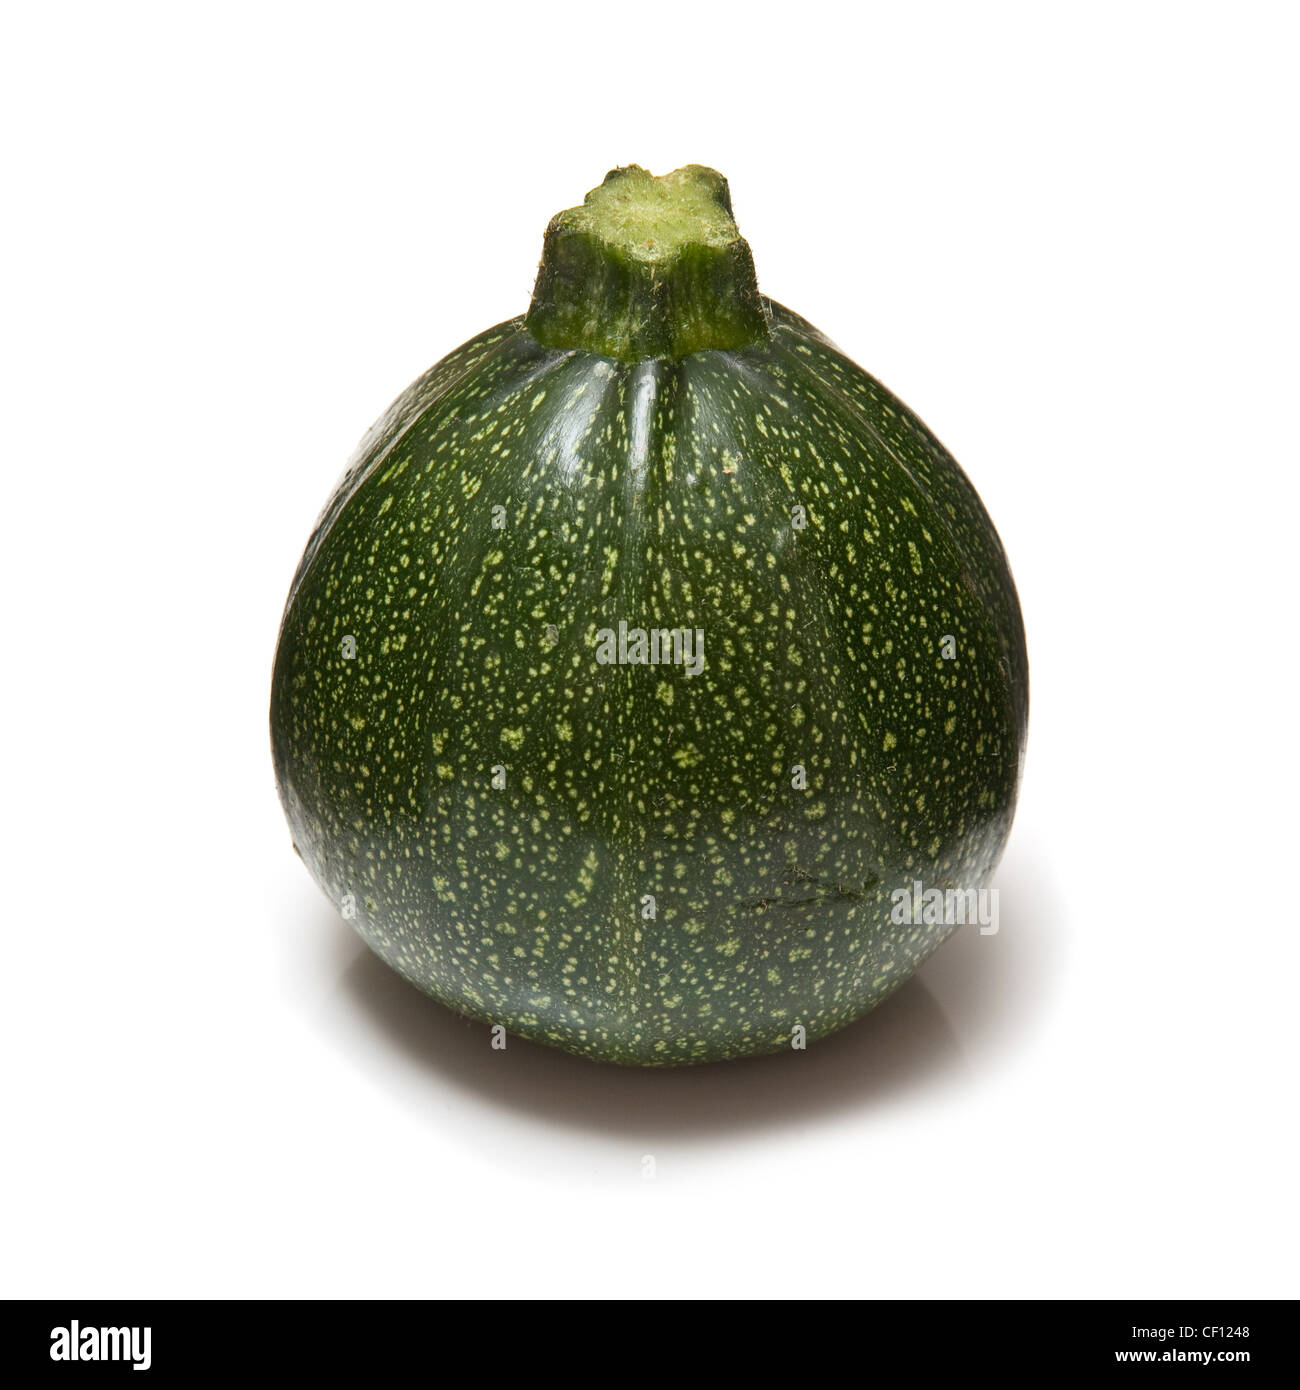 Globe courgette isolated on a white studio background. Stock Photo